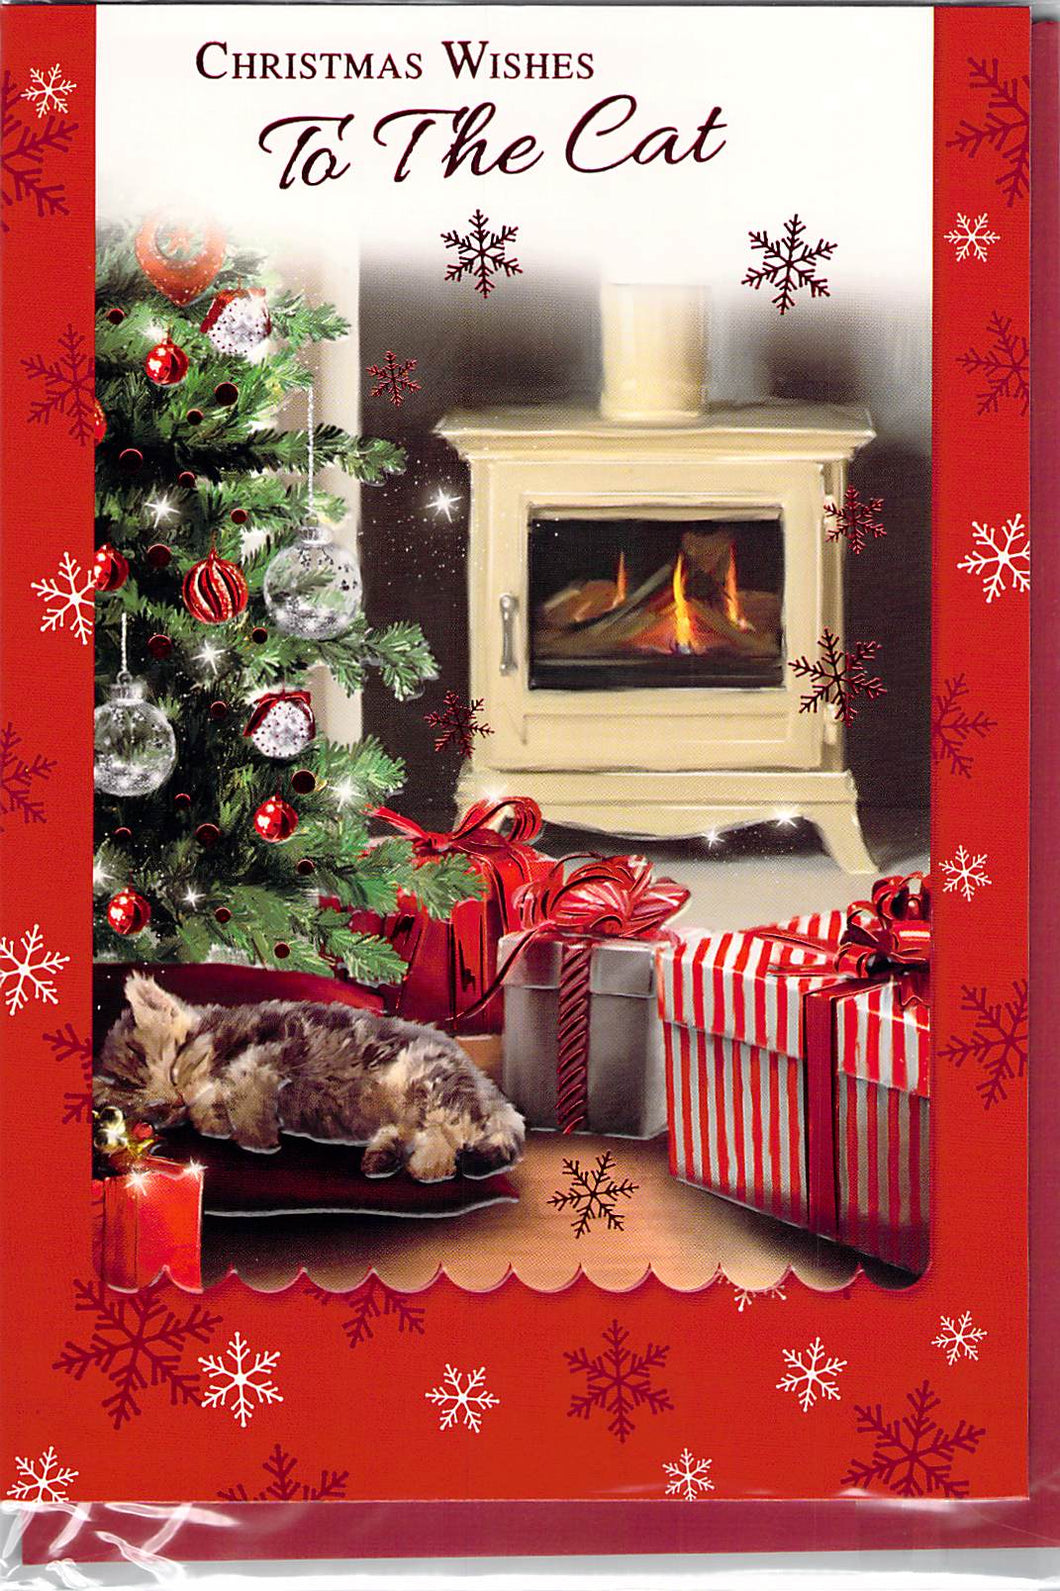 Christmas - To The Cat - Greeting Card - Multi Buy Discount - Free P&P